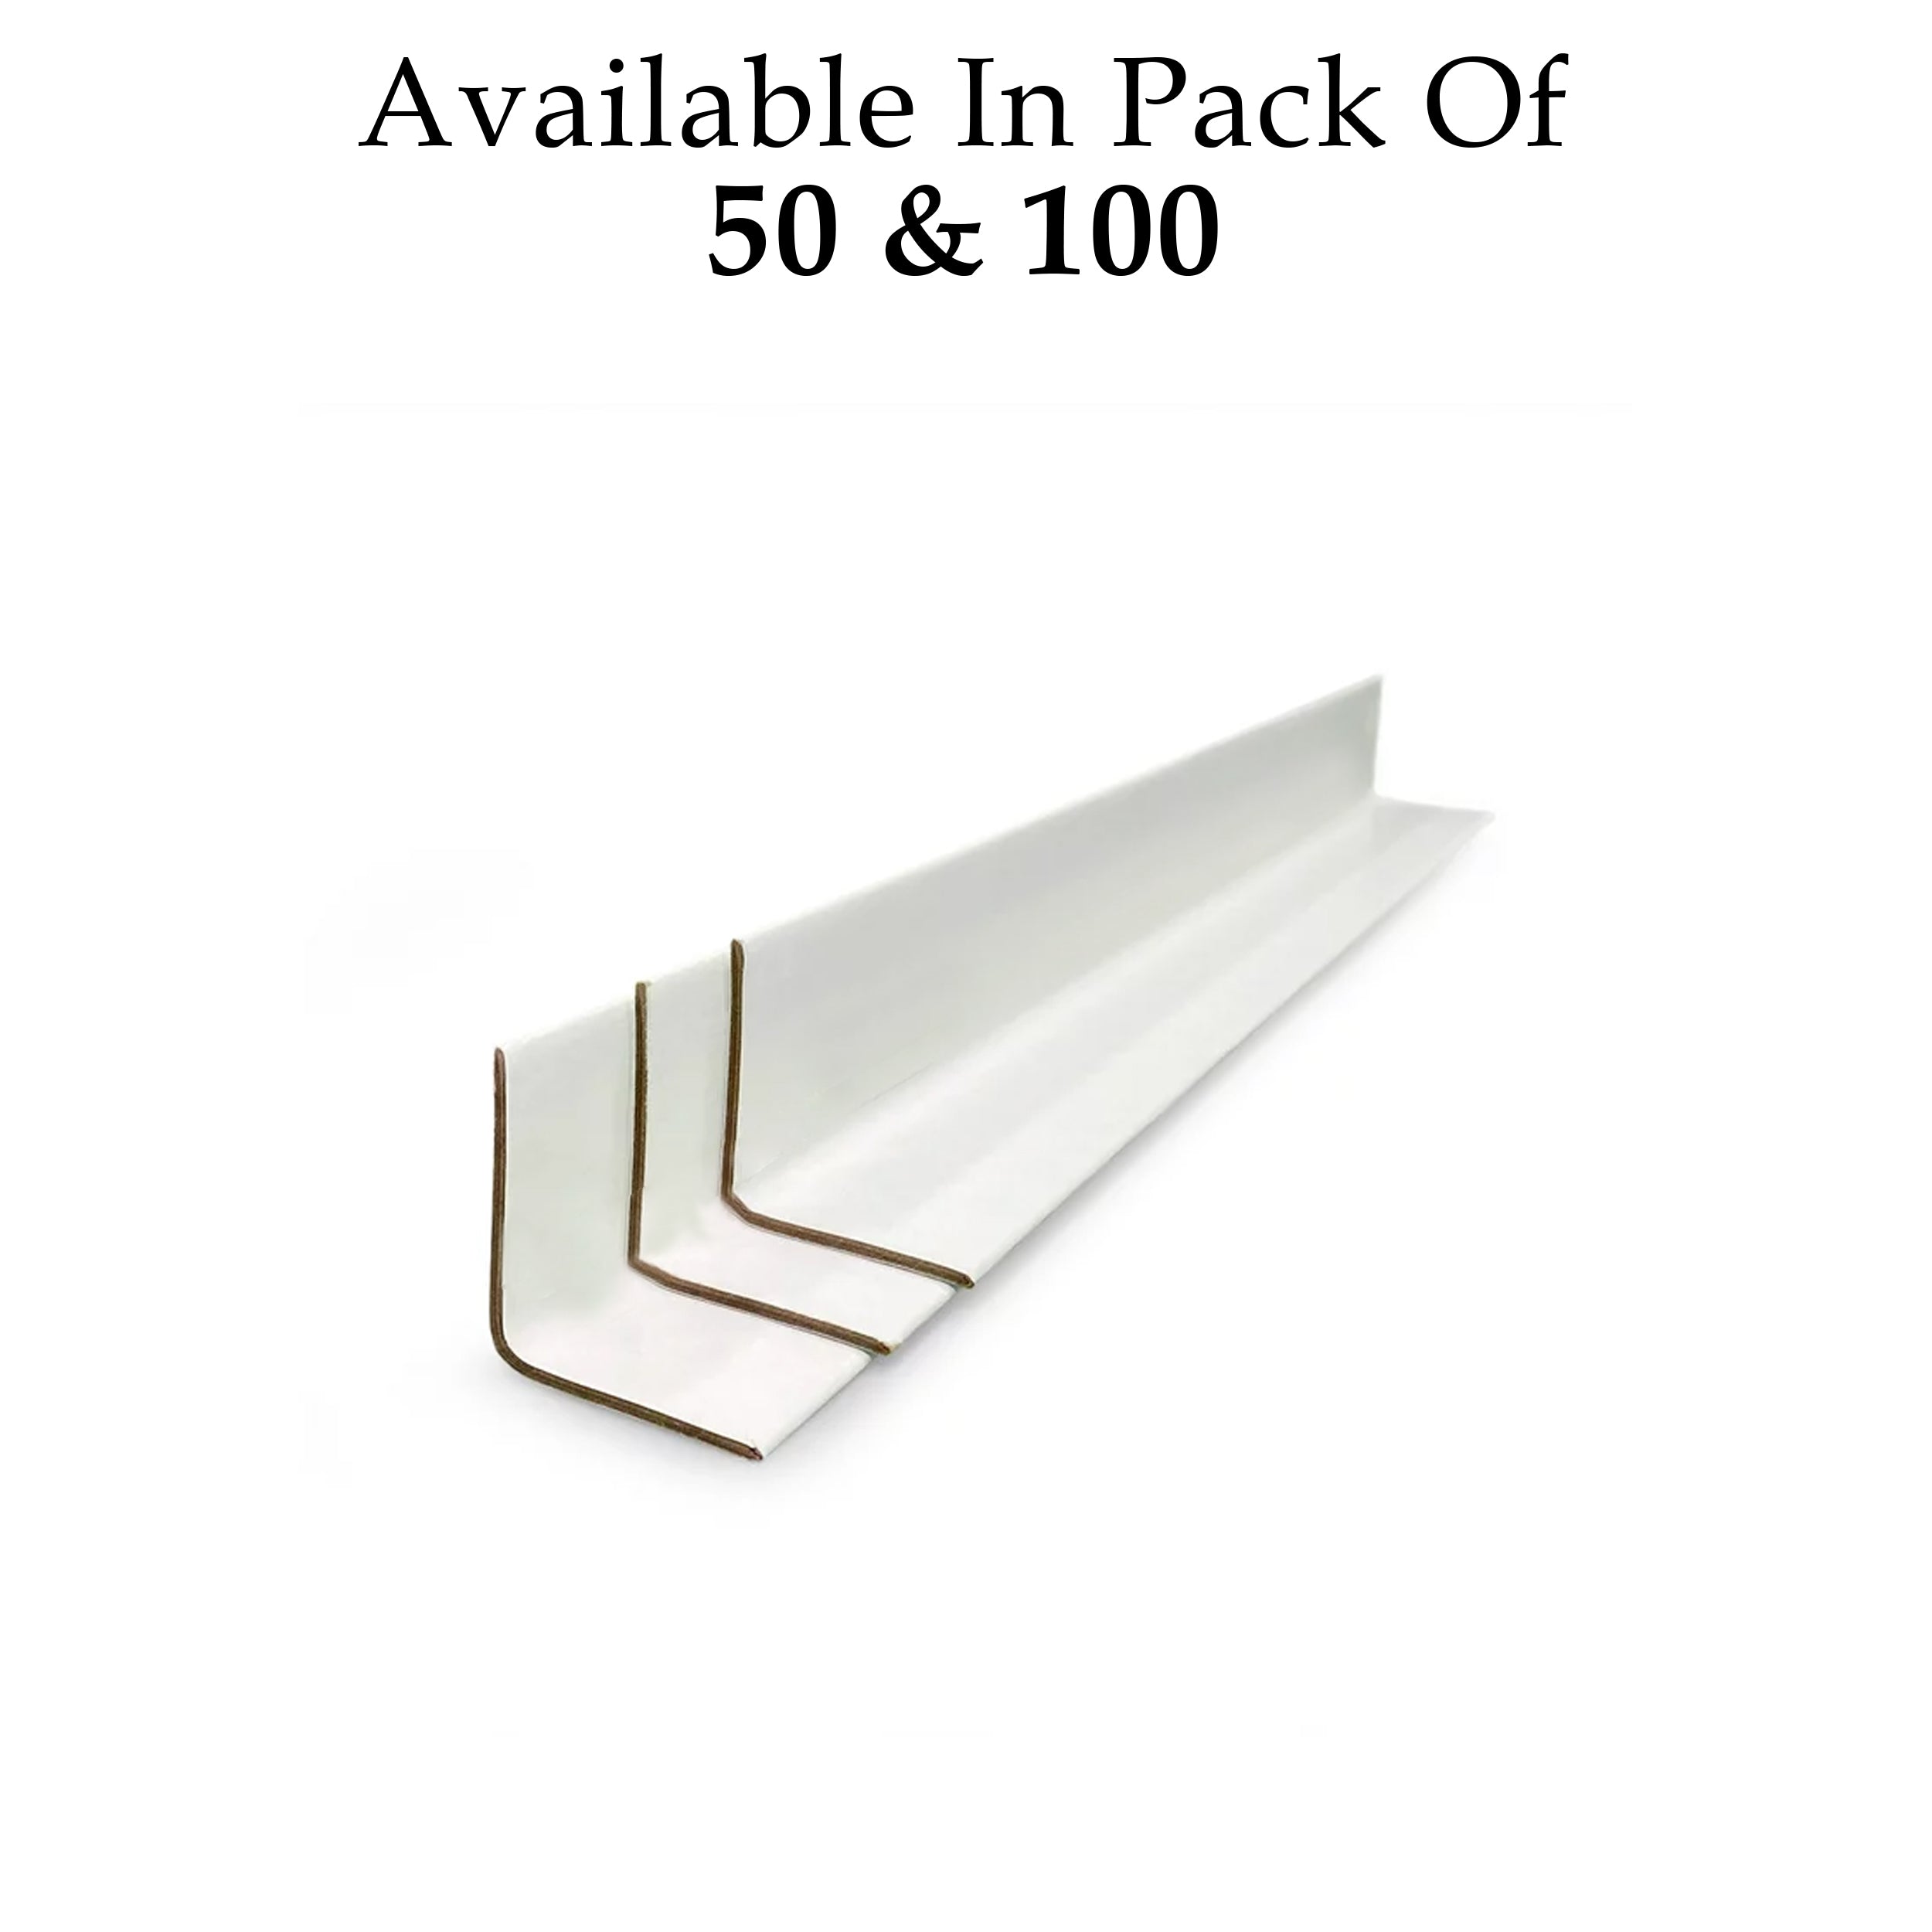 Cardboard Edge Protectors 24'' X 2'' X 2'' Pack of 100 cardboard protectors for pallets, White V-Board Reinforced Edges/Corners for Shipping, Corner Protectors for Moving/Packing